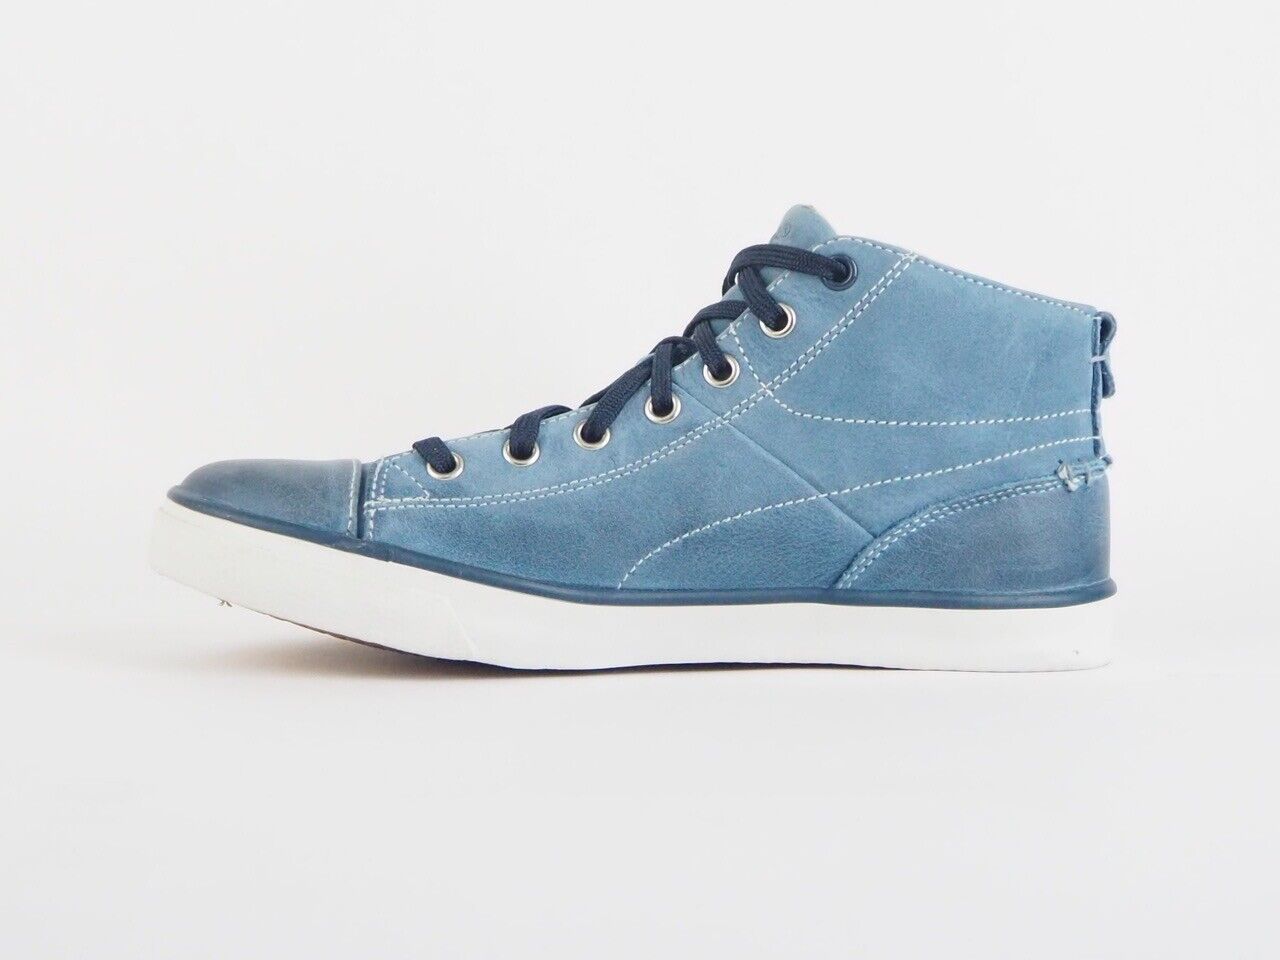 Mens Timberland Earthkeeper Hokcmp CTC LT 5265A Blue Leather Hi Top Trainers - London Top Style